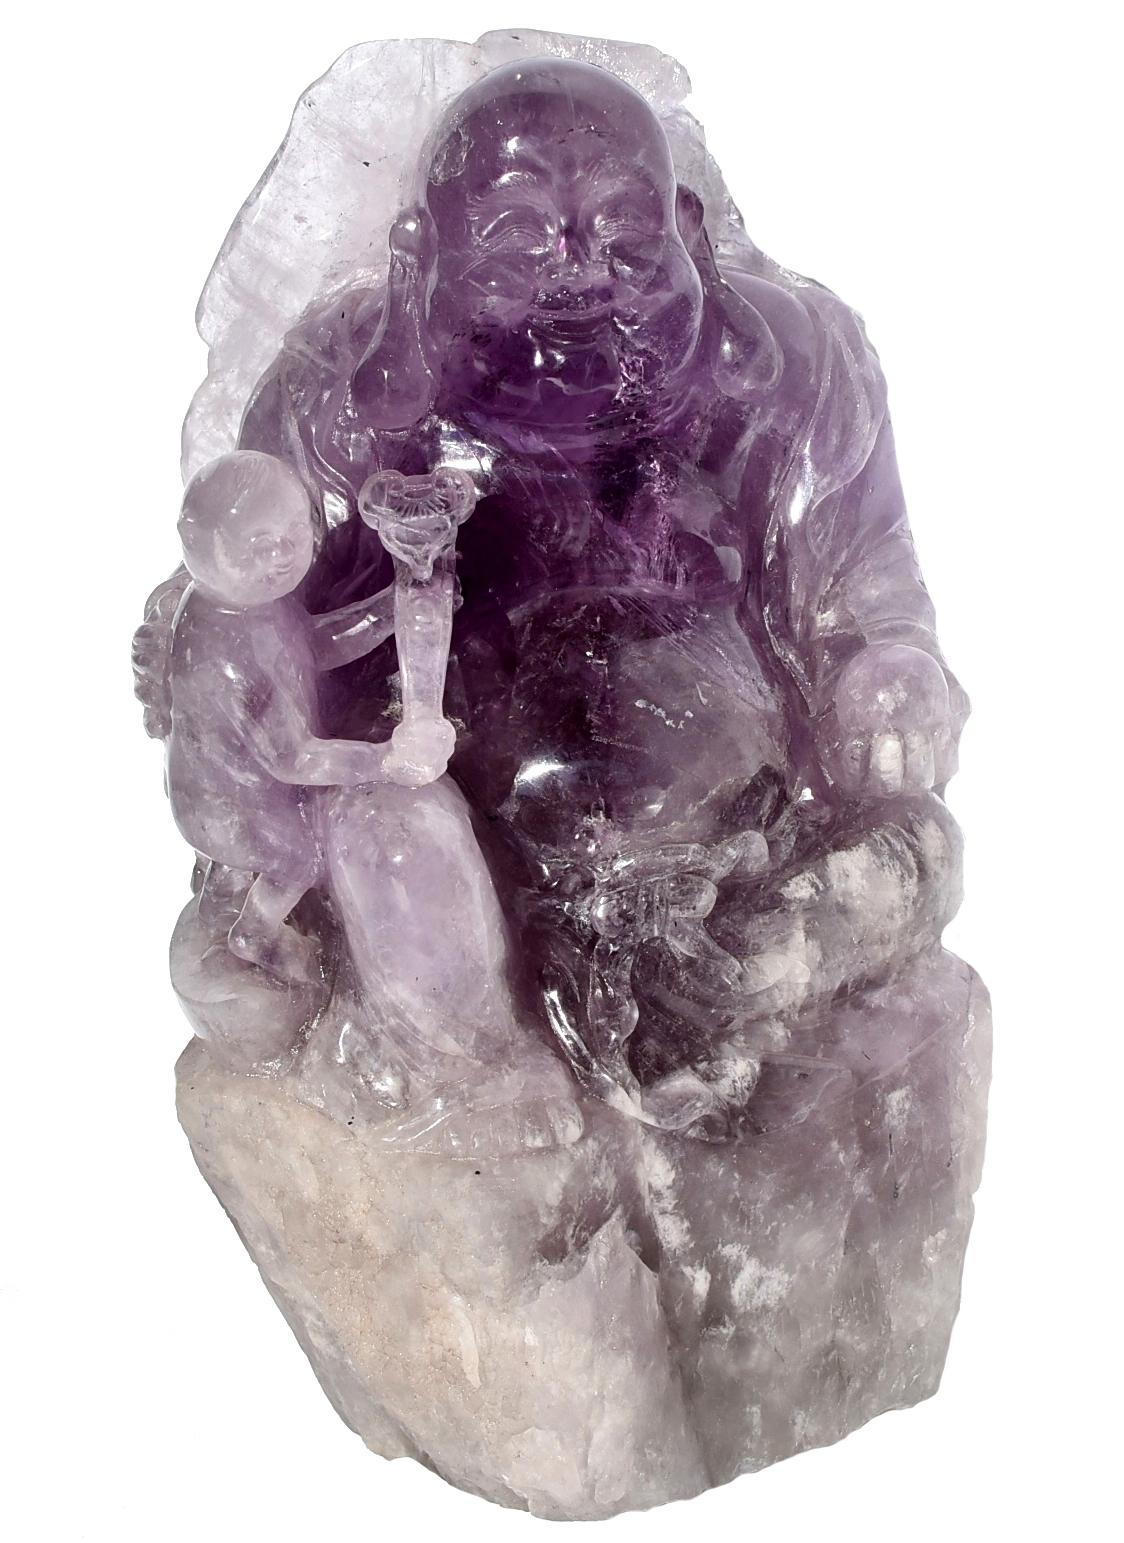 A huge Amethyst Buddha that weights 14.6 lbs. The sculpture is of the Happy Buddha, shown here with a boy holding a Ruyi, scepter. The boy is also sitting on a tael of gold, called Yuan Bao, which is a symbol of wealth. A lotus leaf covers the back